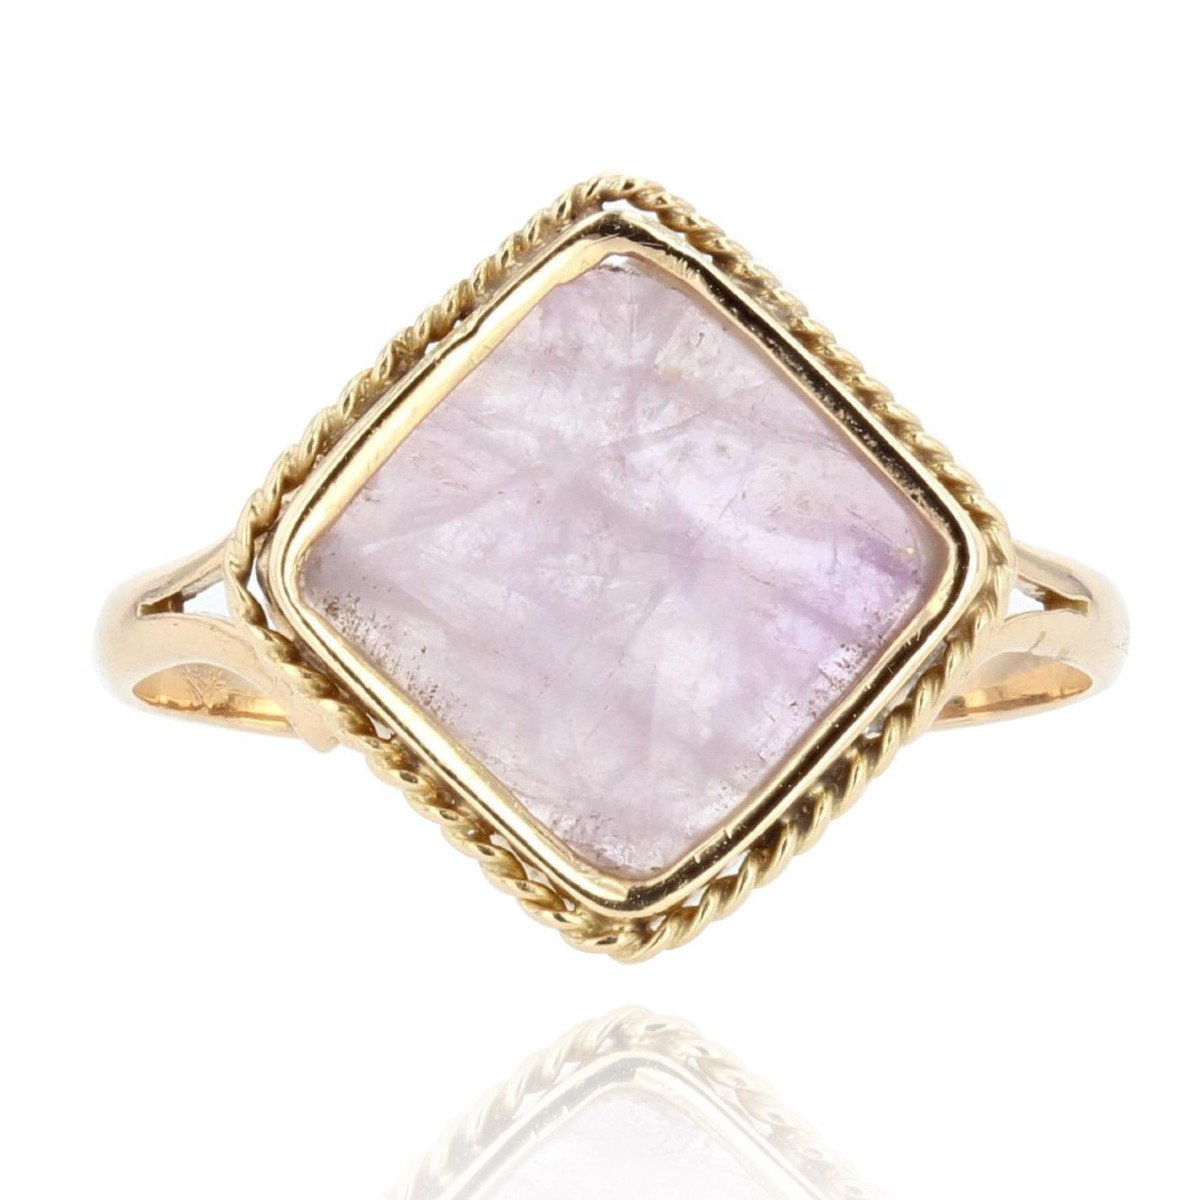 Old Amethyst And Gold Ring